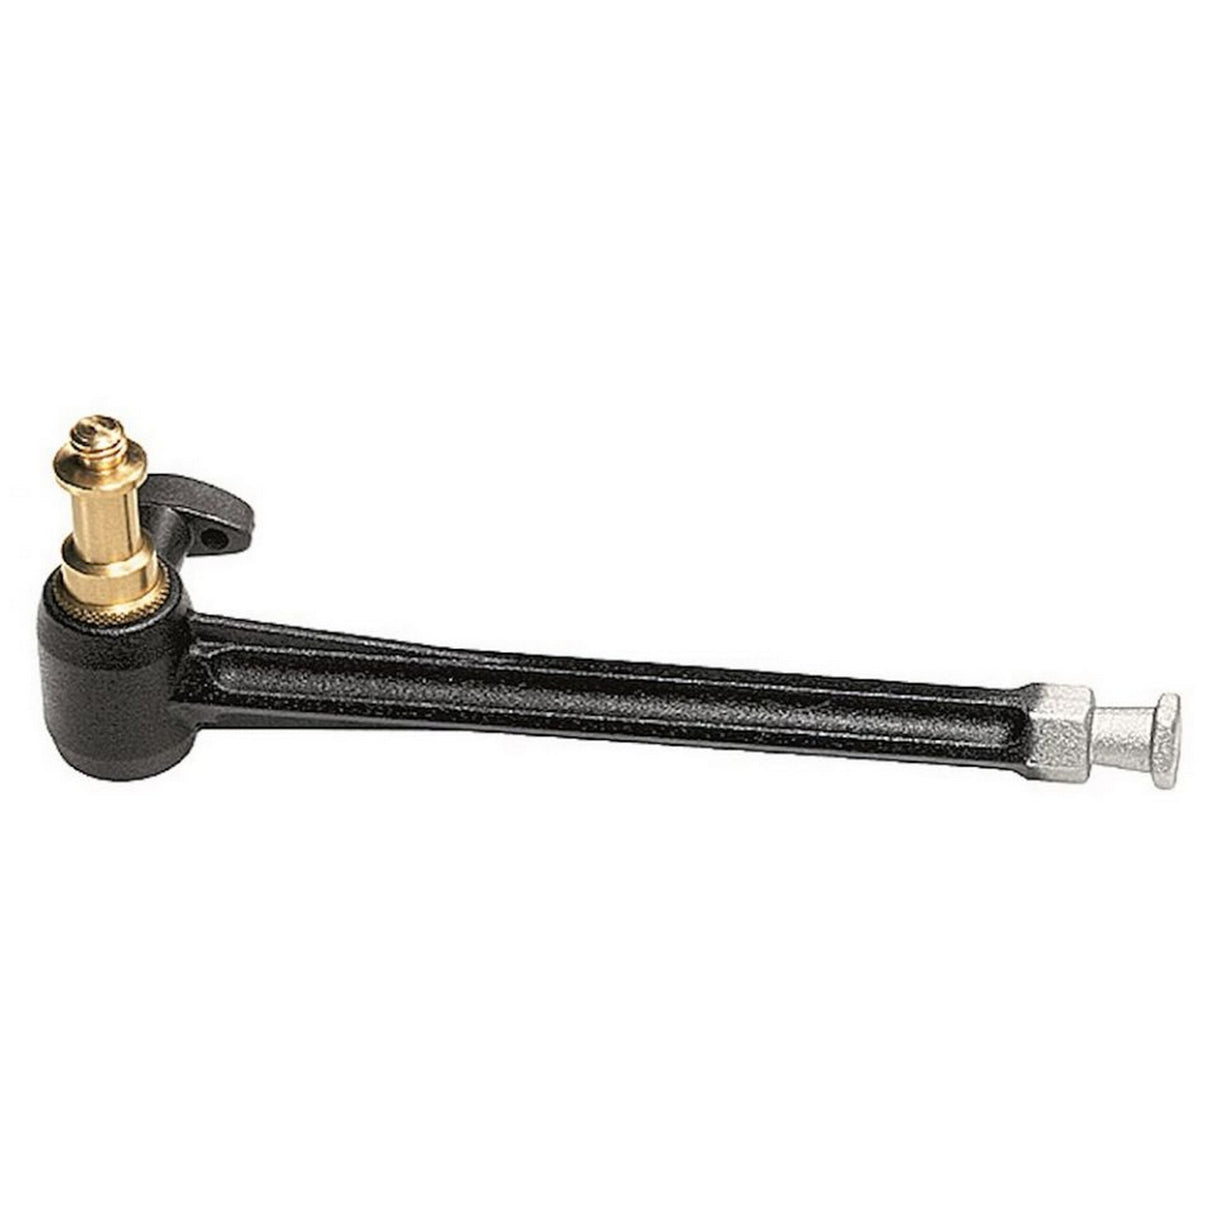 Manfrotto 042 Extension Arm for Super Clamp 035 Socket